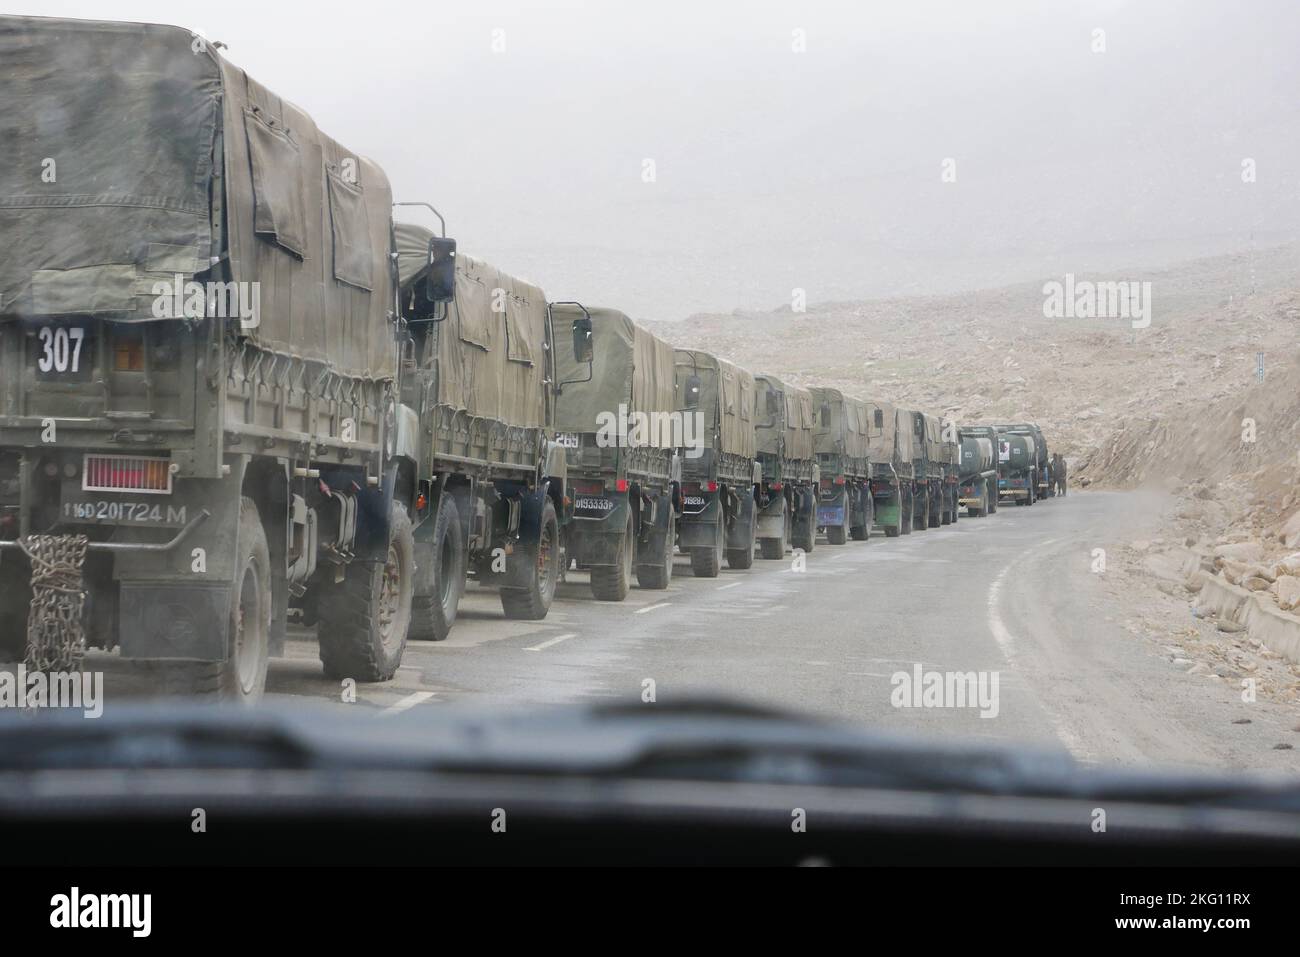 The Indian military army trucks driving through a deserted road Stock Photo